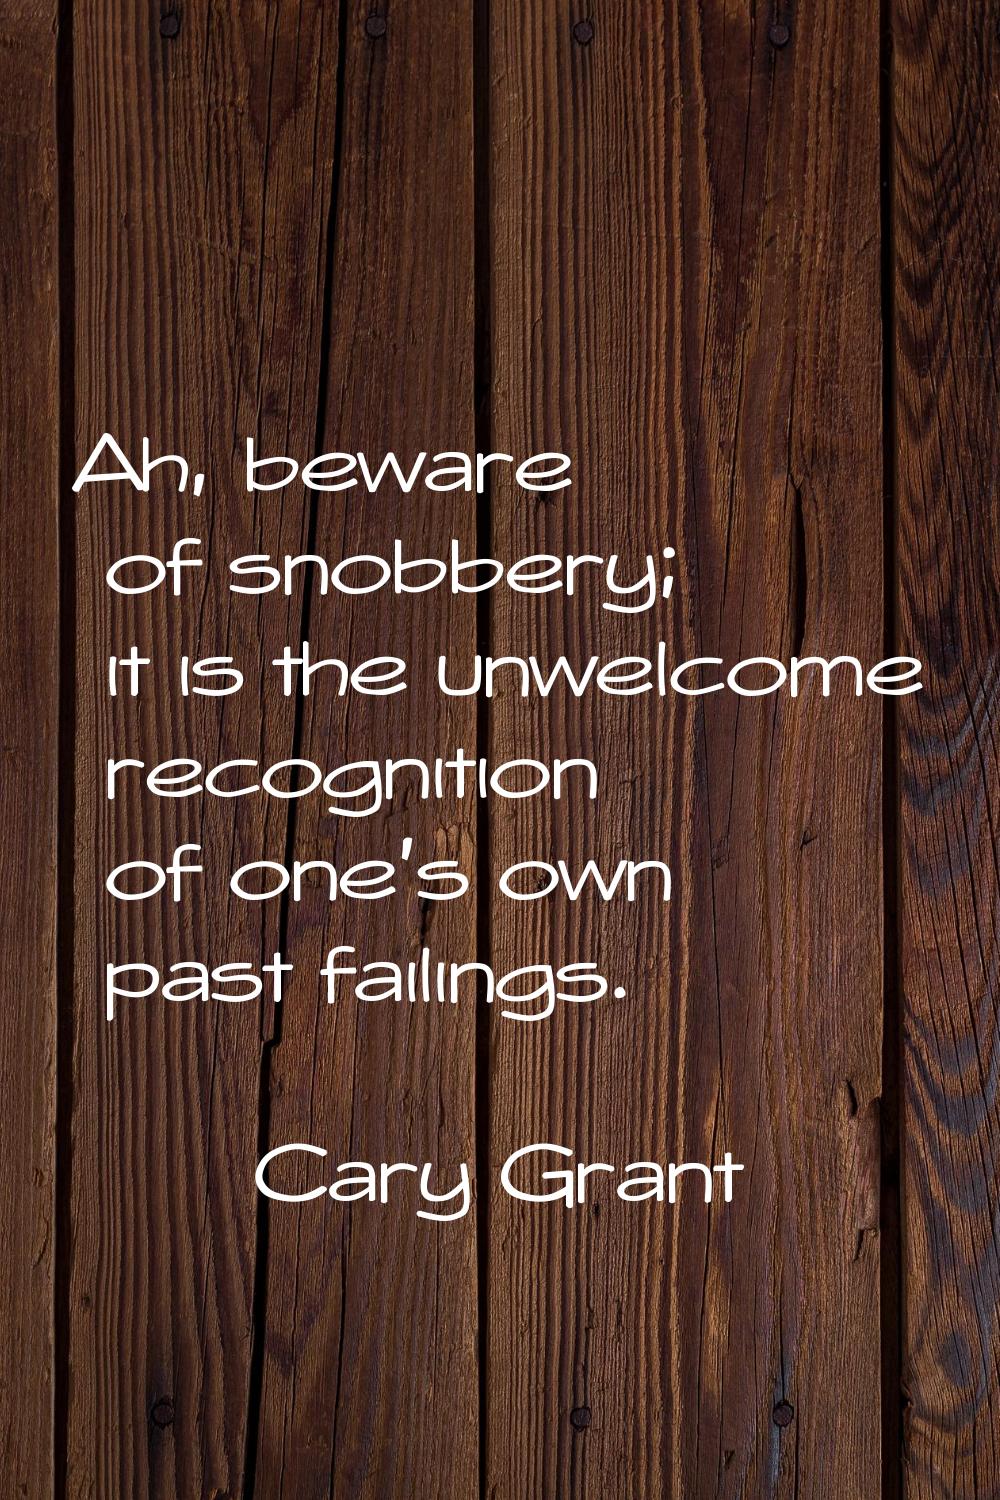 Ah, beware of snobbery; it is the unwelcome recognition of one's own past failings.